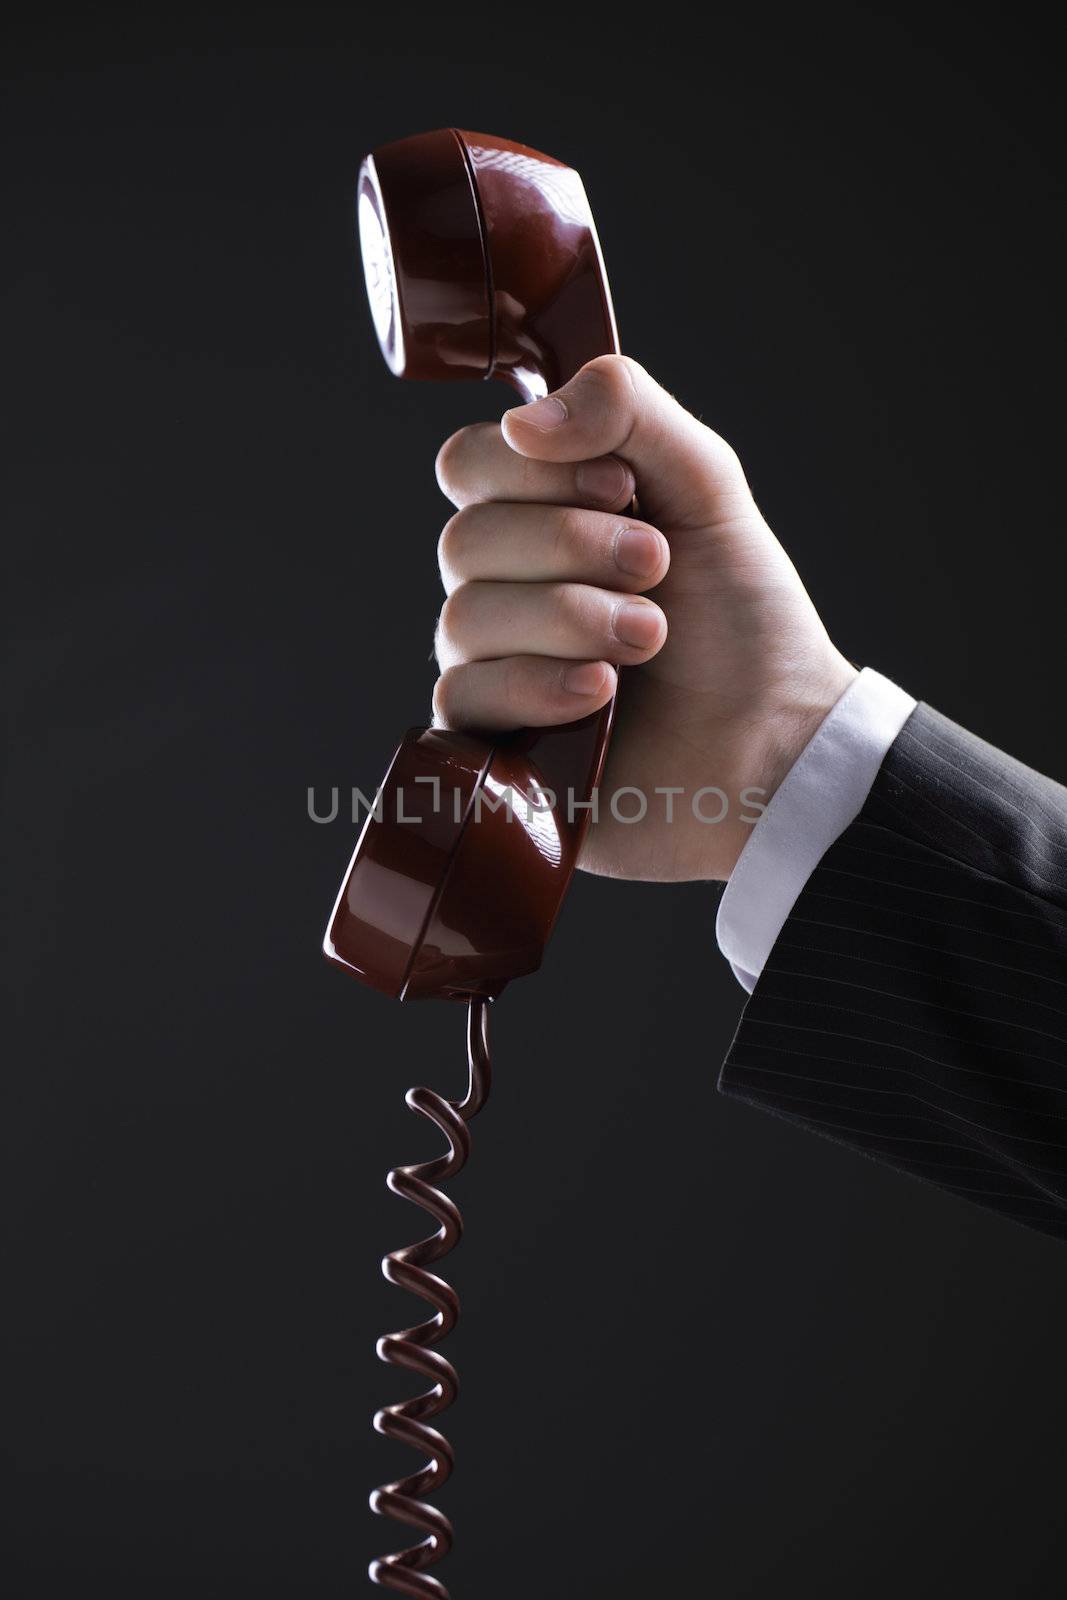 Businessman holding out a red phone, hand close up